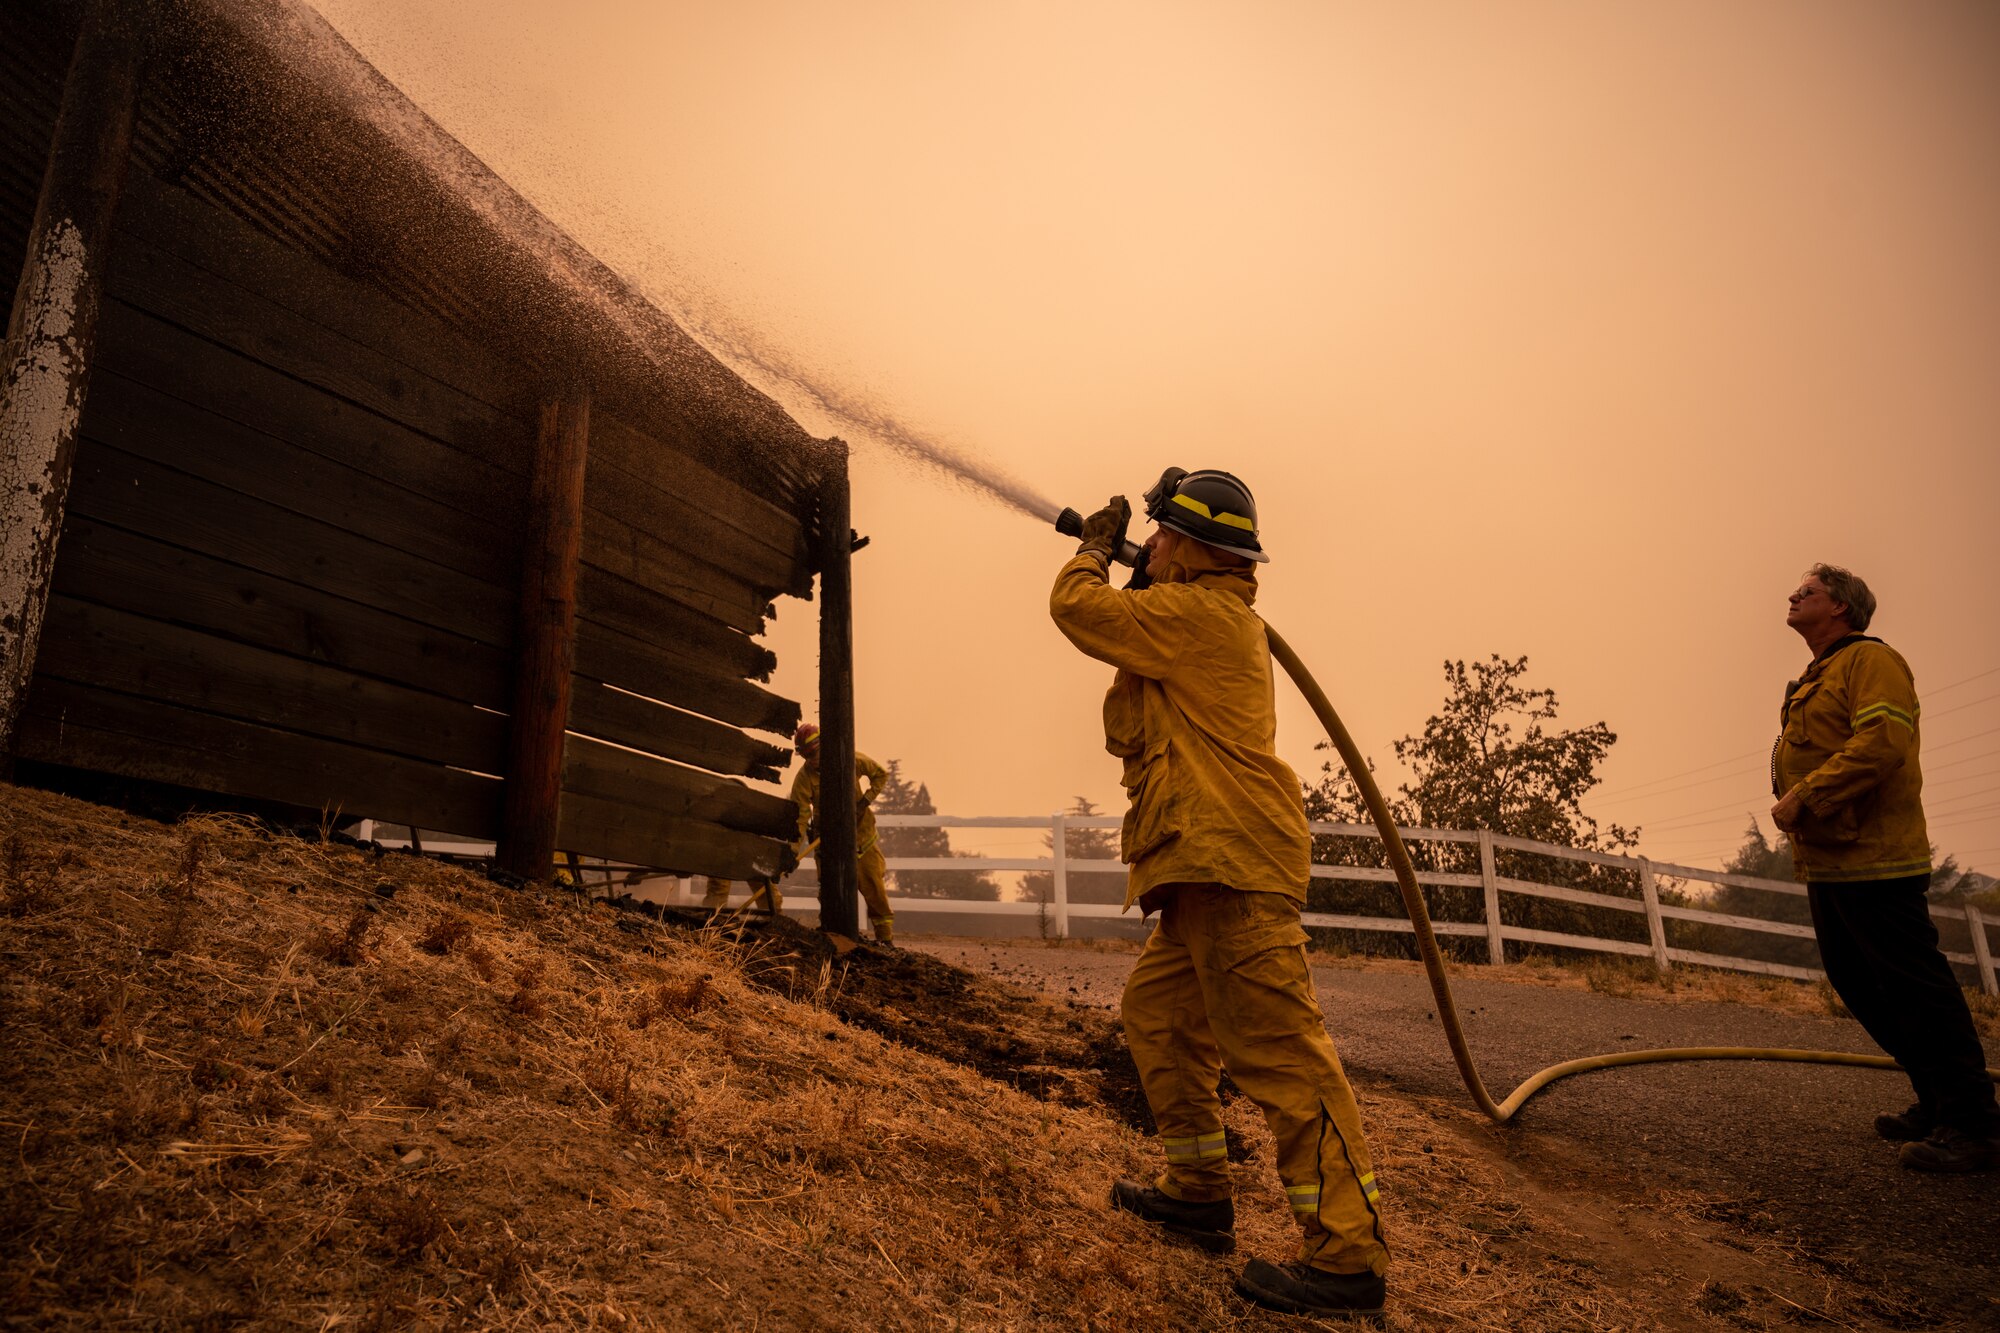 A firefighter puts out a fire with a hose.